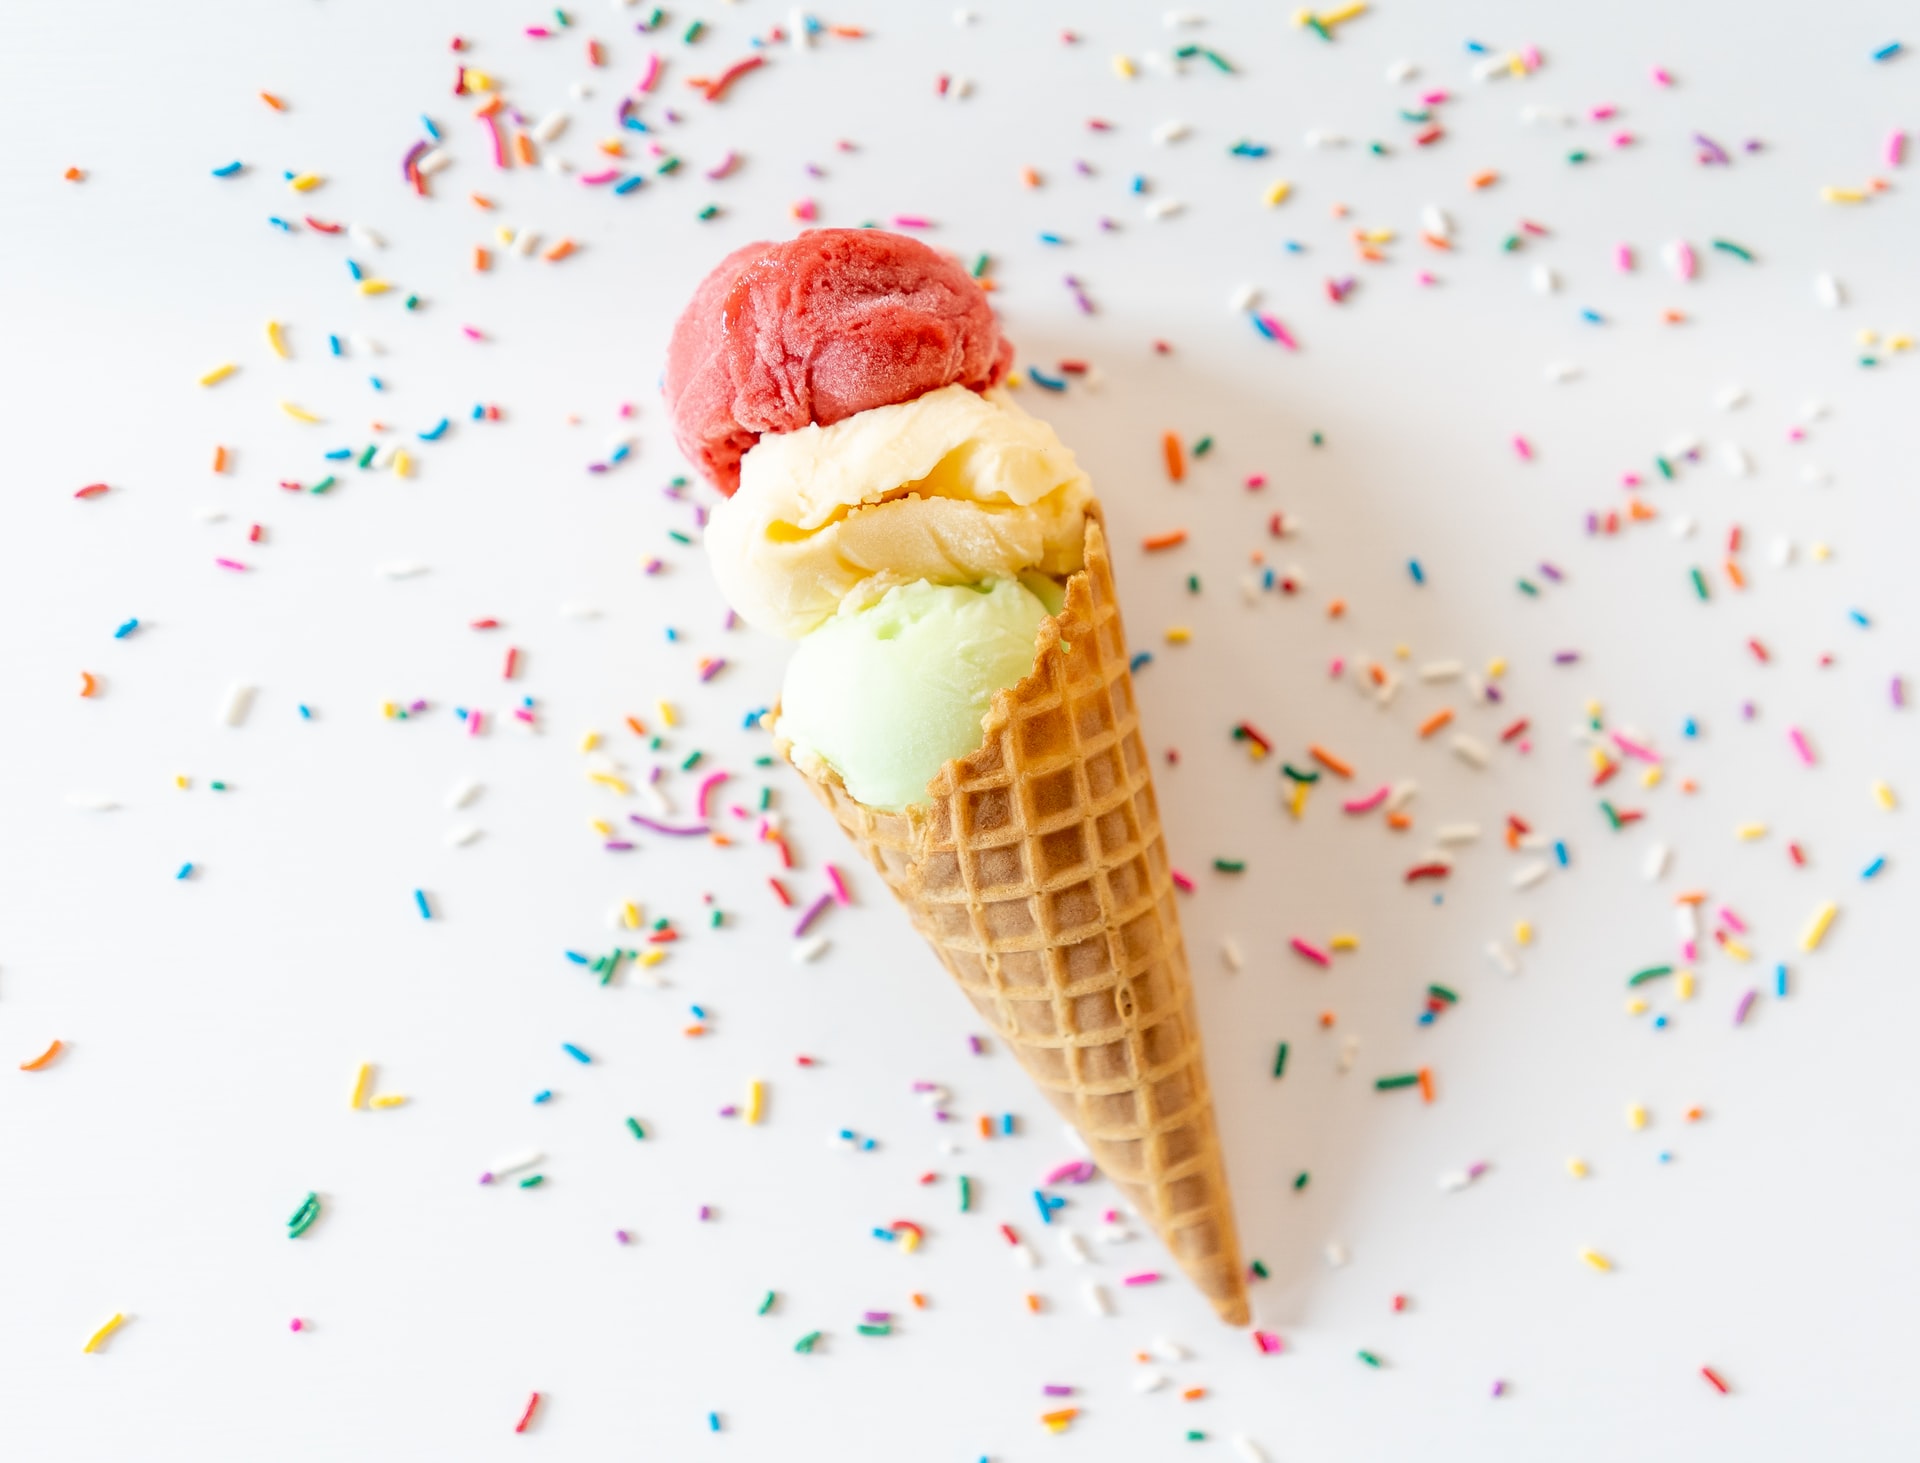 What Was The World's First Ice Cream Flavor?